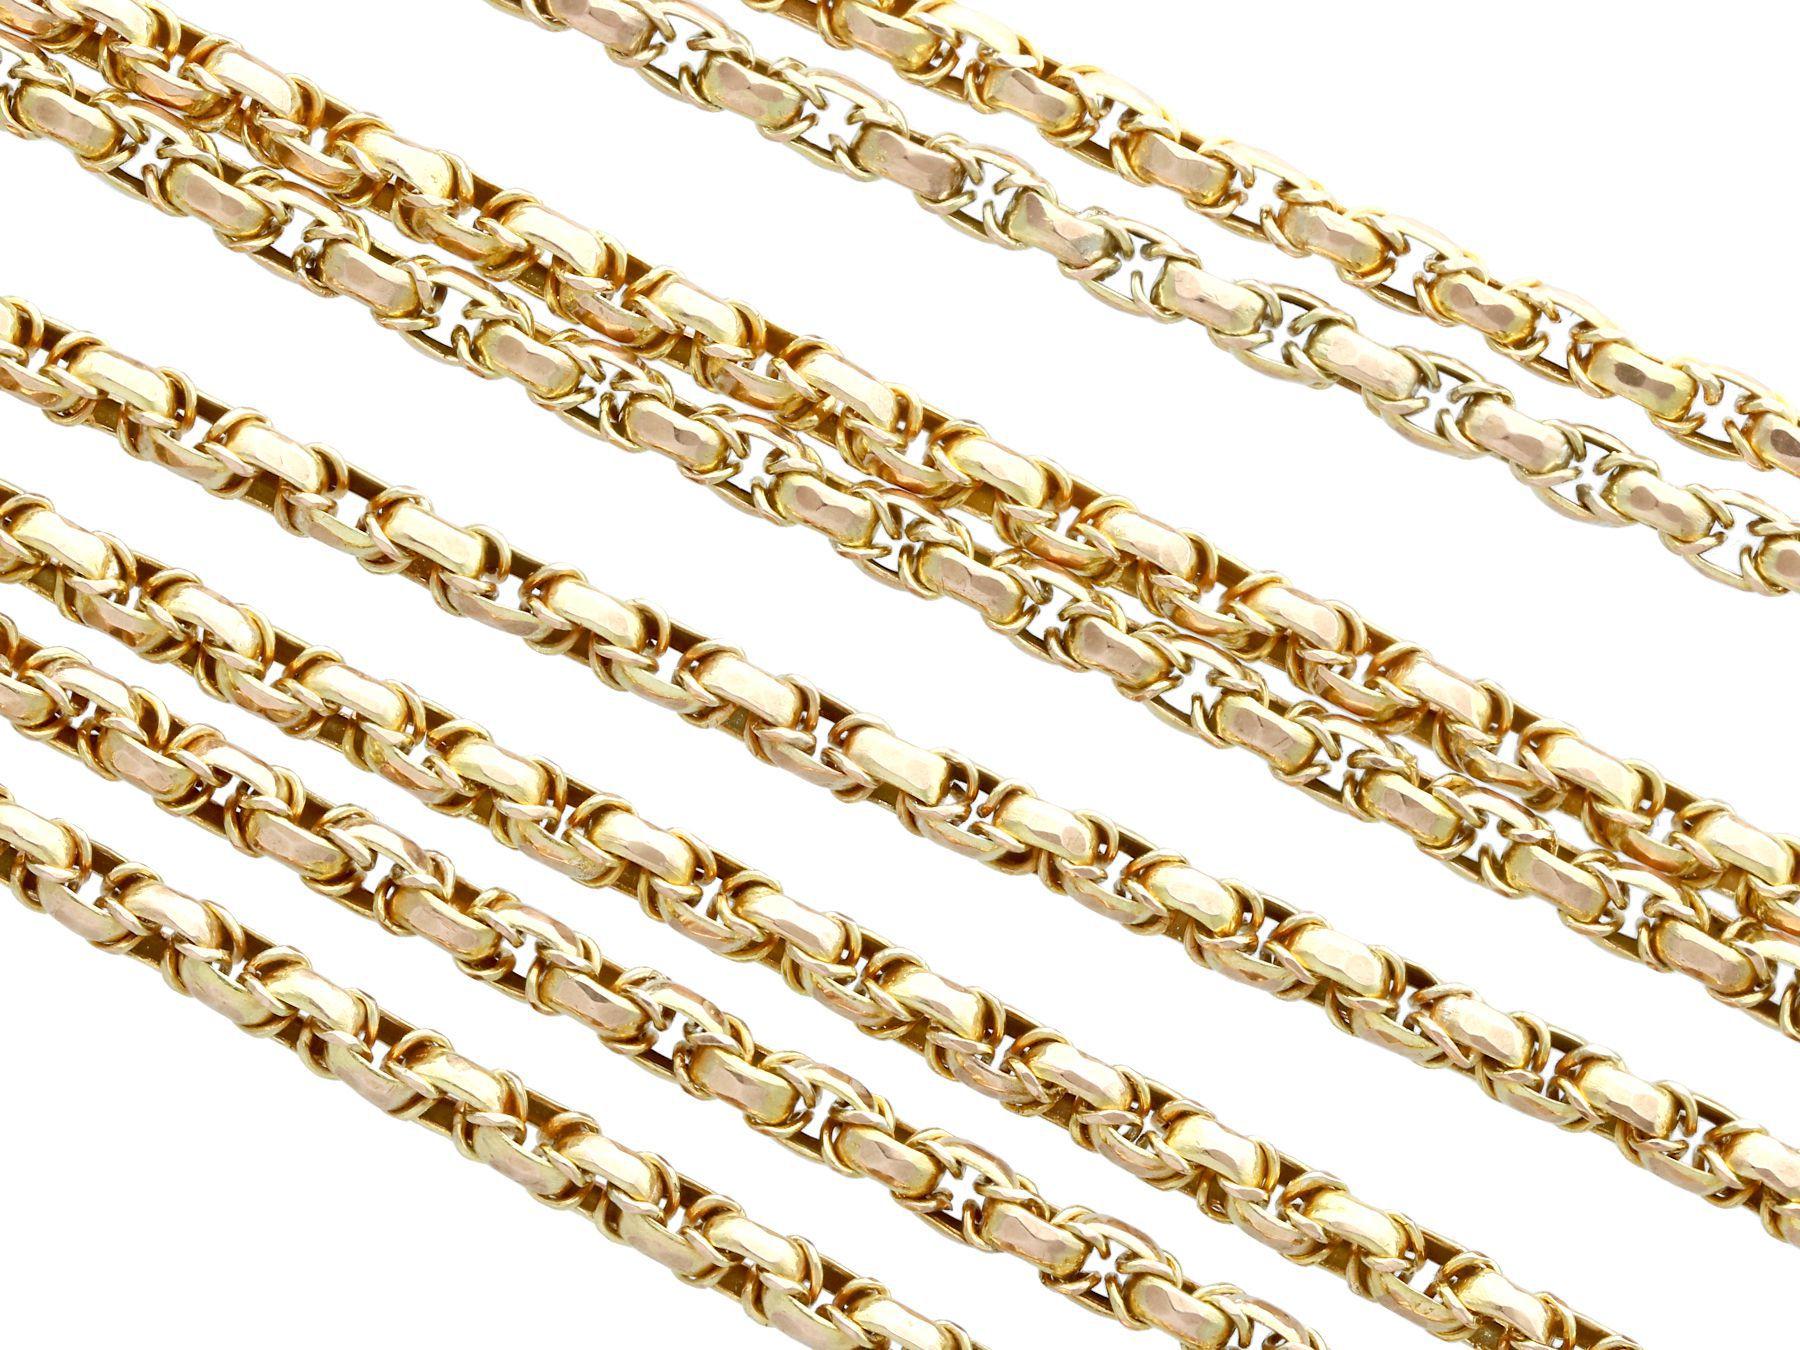 An exceptional, fine and impressive, antique 9 karat yellow gold longuard chain; part of our diverse antique necklace and pendant collection

This exceptional, fine and impressive antique longuard chain has been crafted in 9k yellow gold.

The